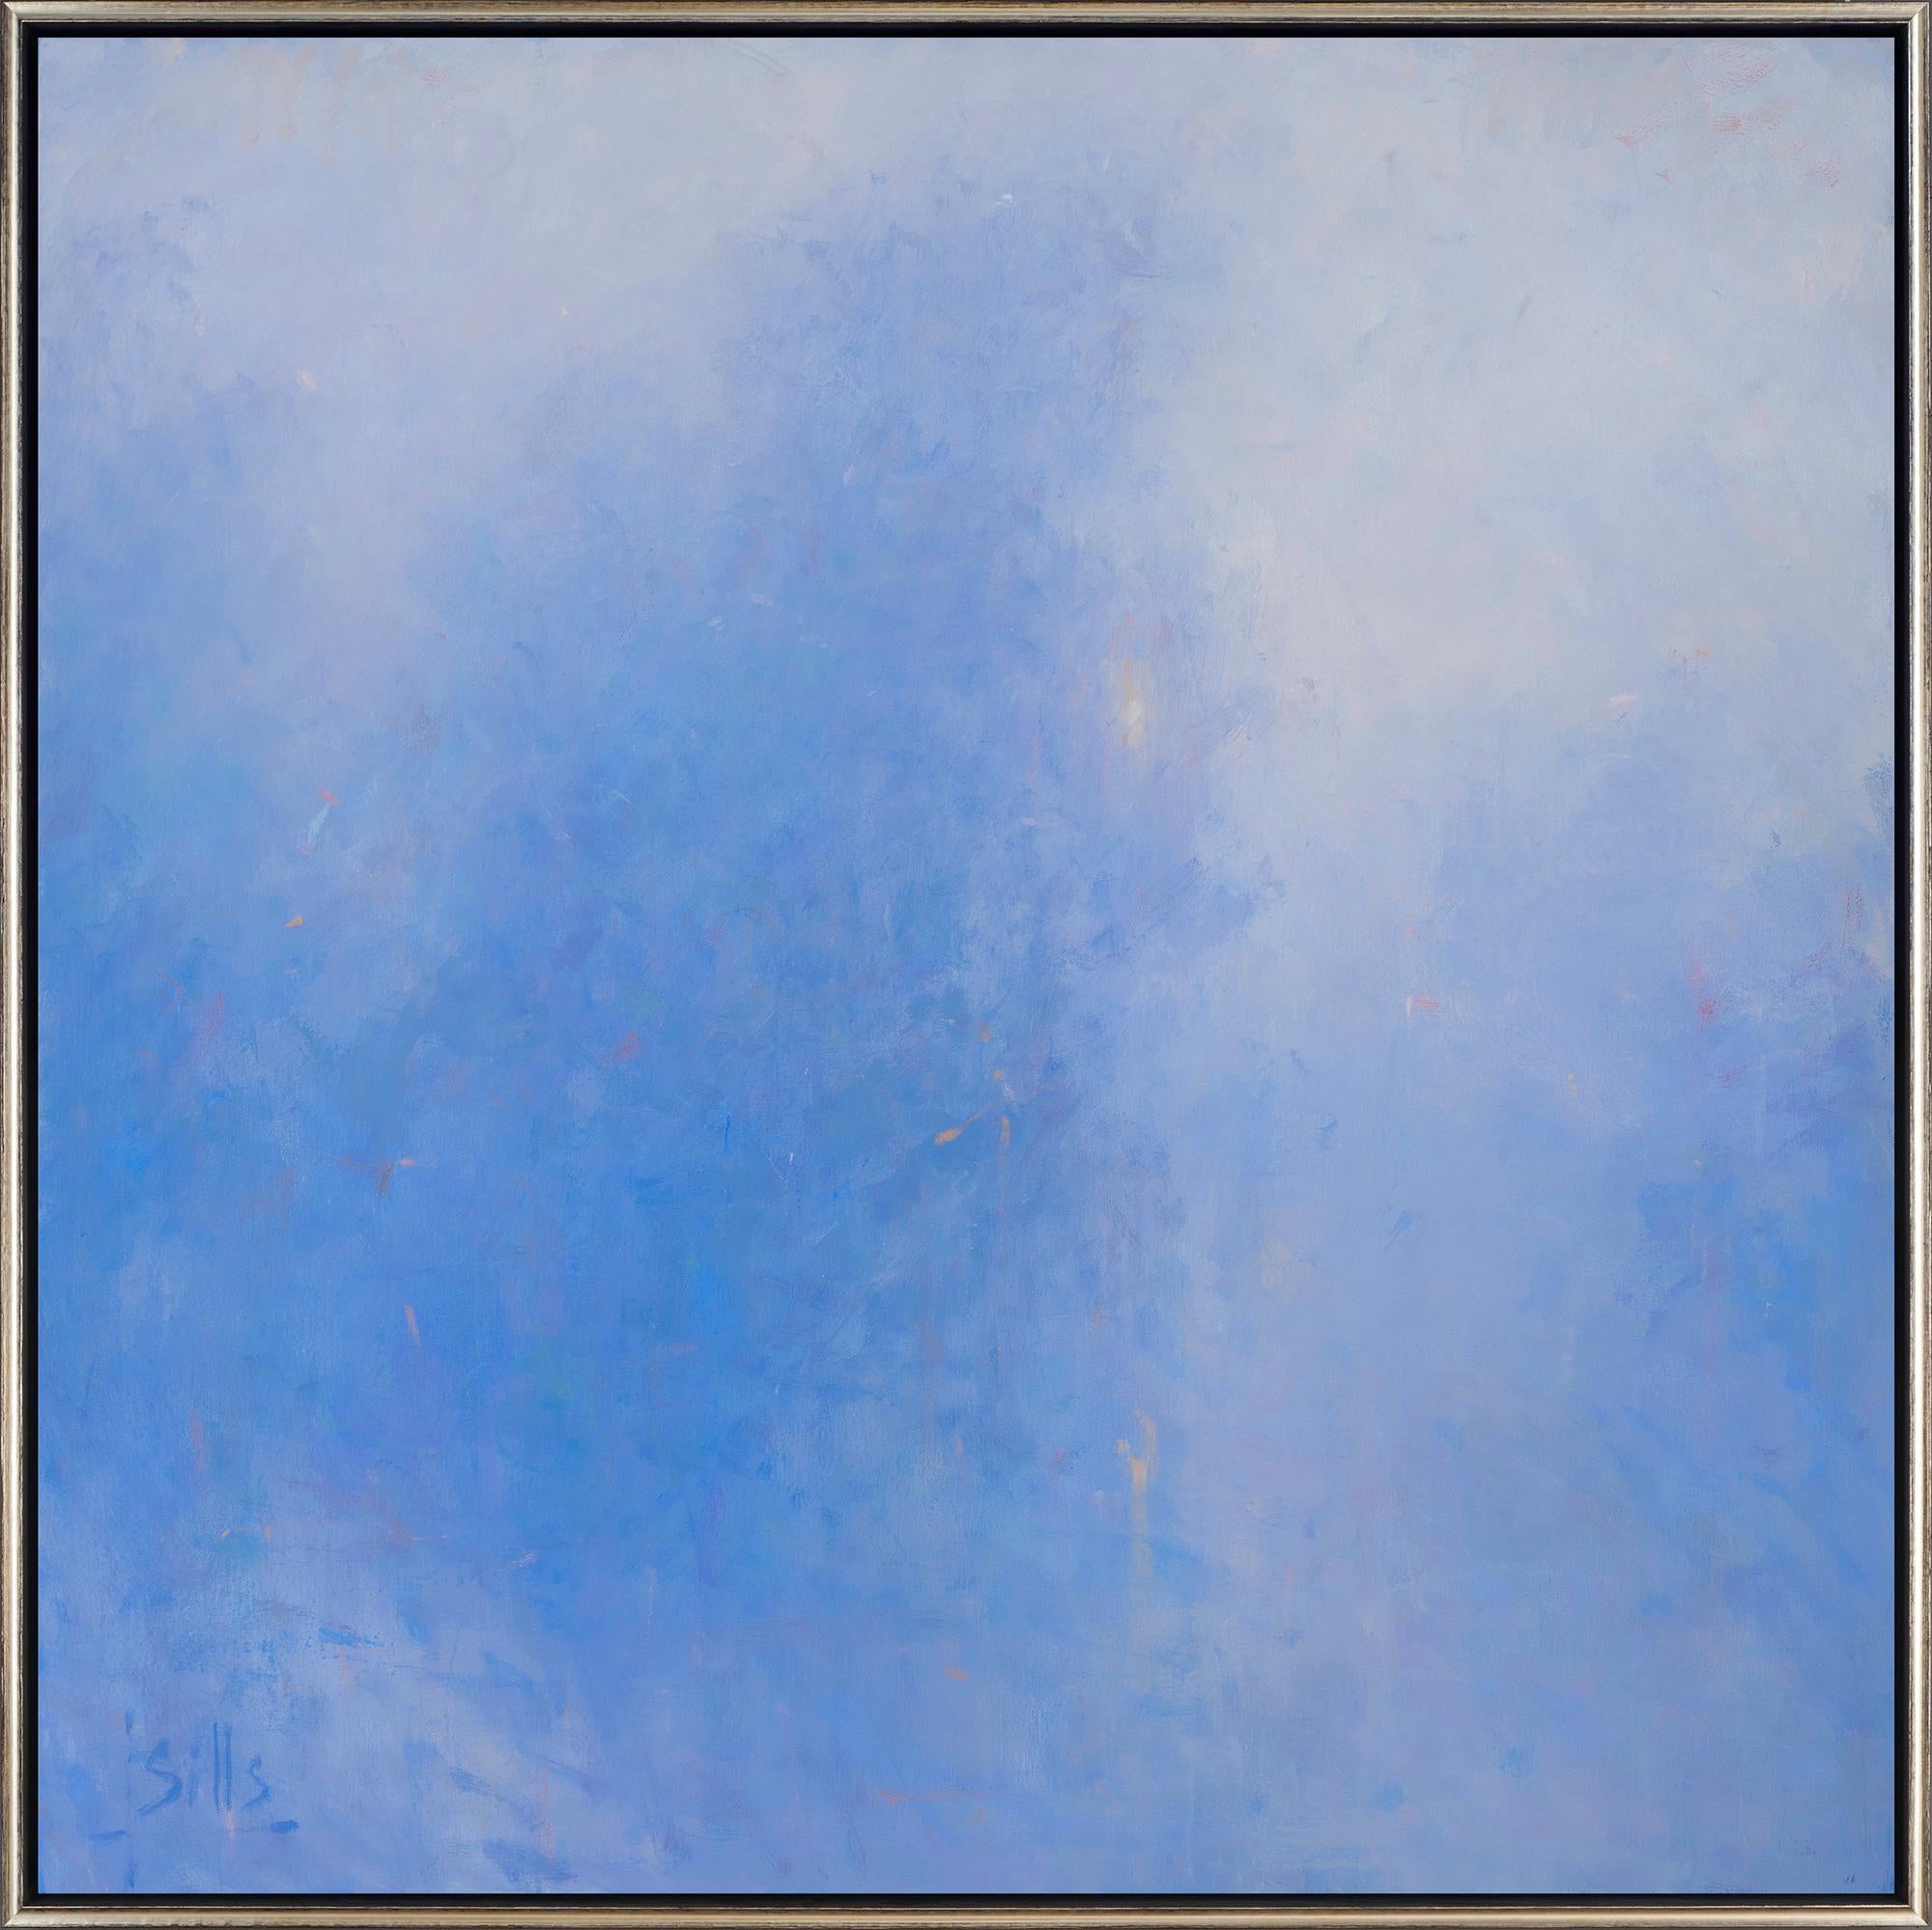 John Sills Landscape Painting - "Harmony in Gray" Abstract Sky Painting with Dynamic Texture & Color Throughout